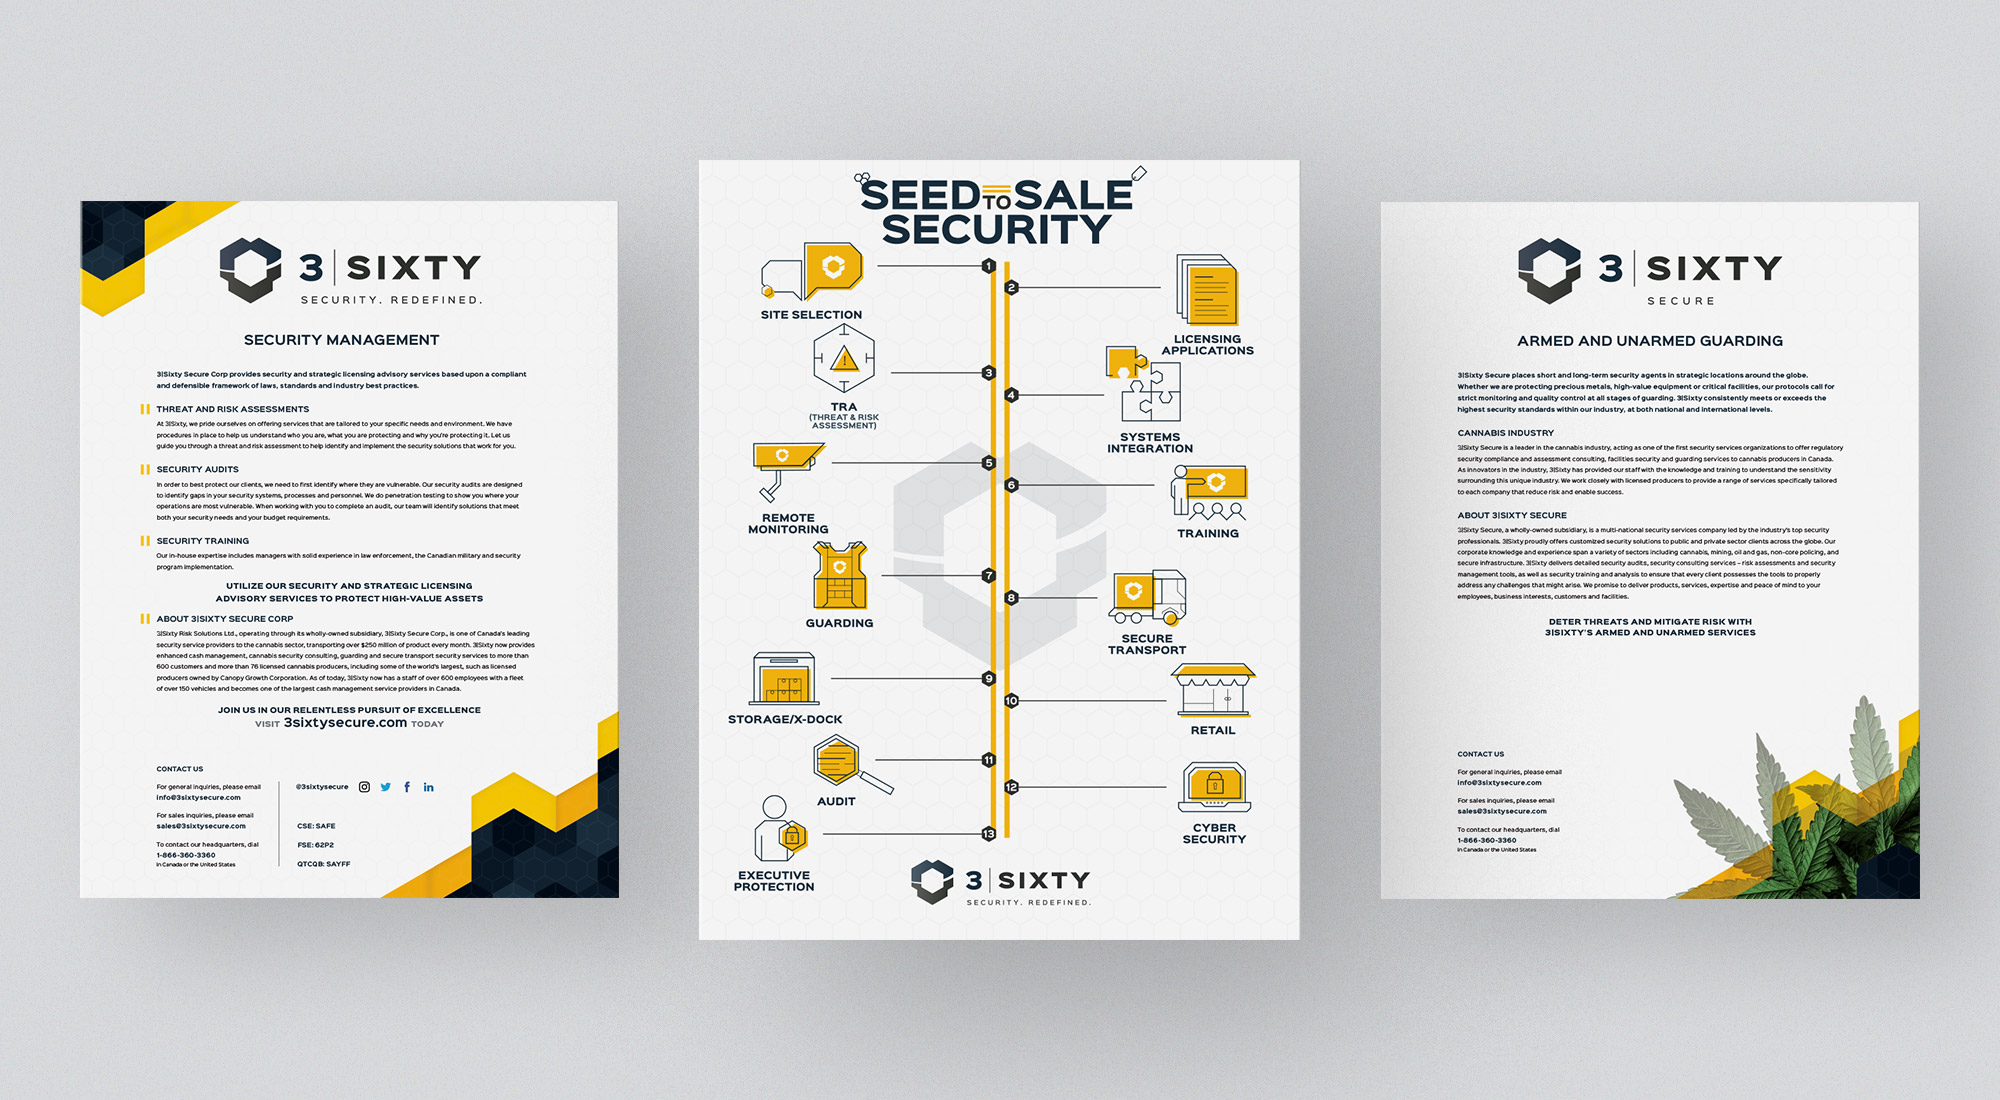 3Sixty Secure Corp